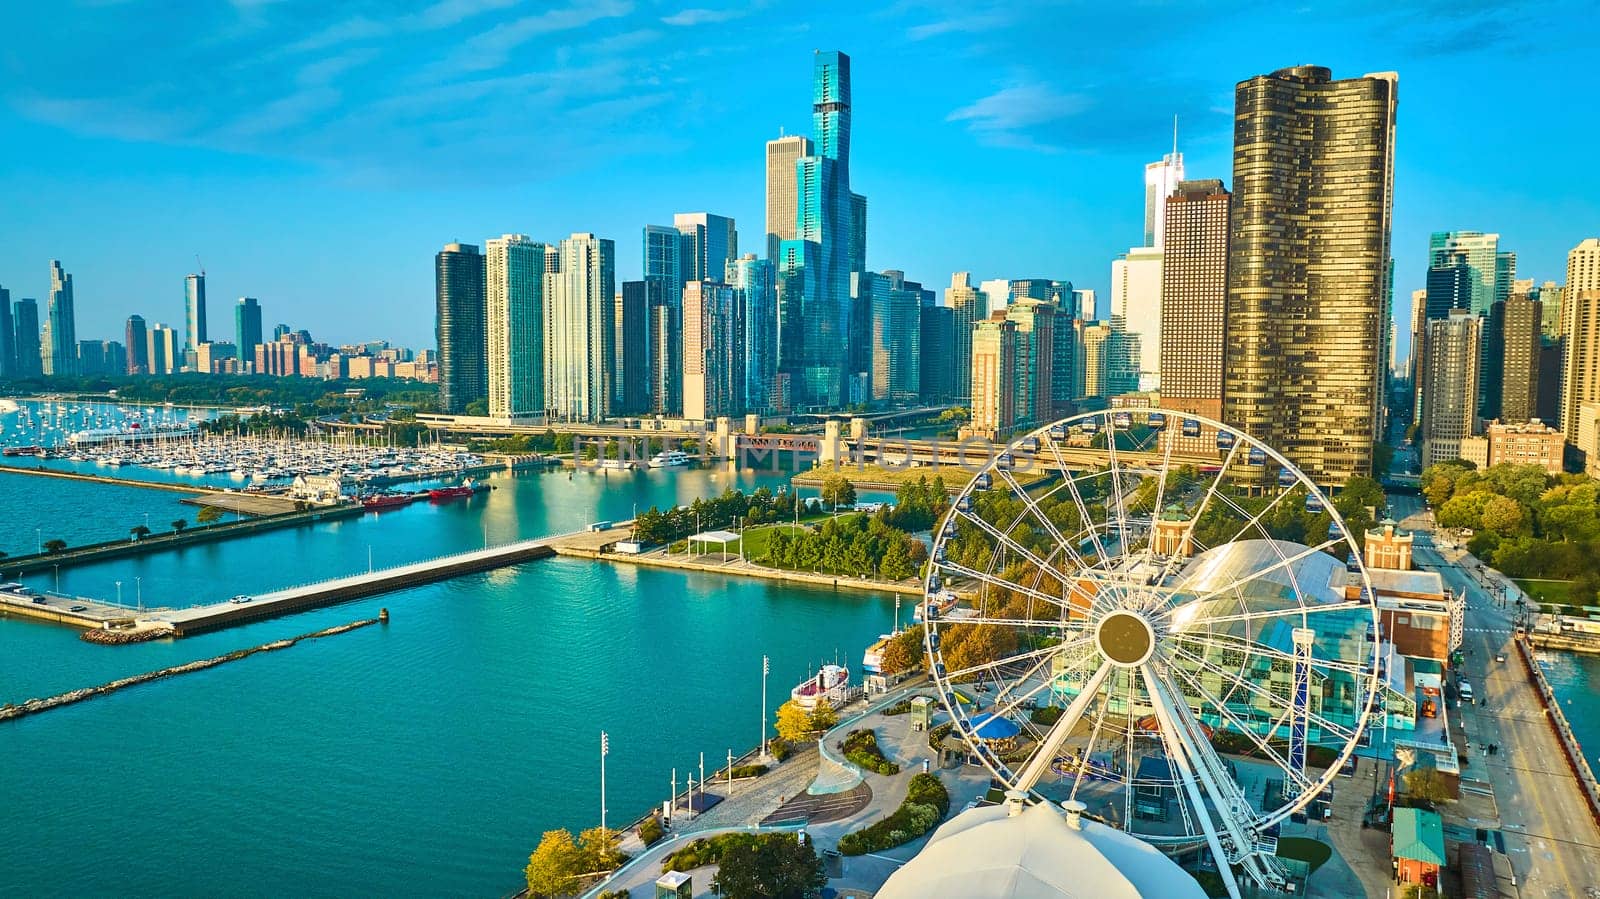 Tourism coast aerial Navy Pier Centennial Wheel sunrise with skyscrapers in Chicago, Lake Michigan by njproductions